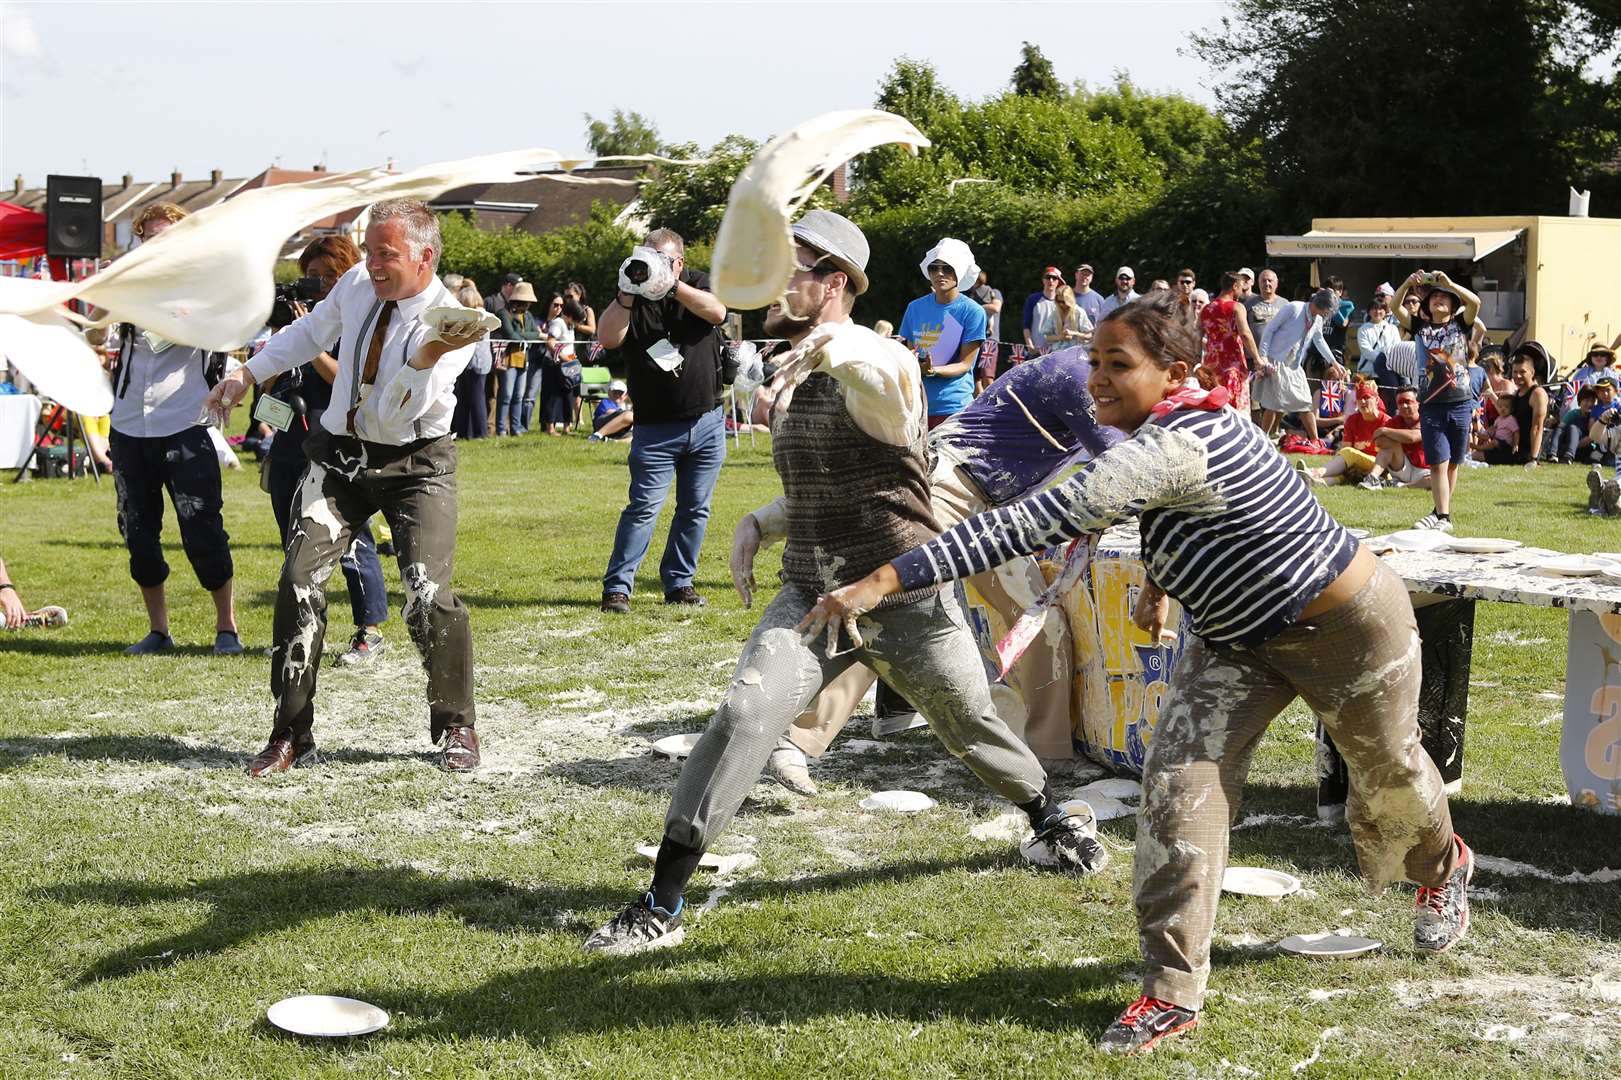 Each year combatants pelt one another with custard pies